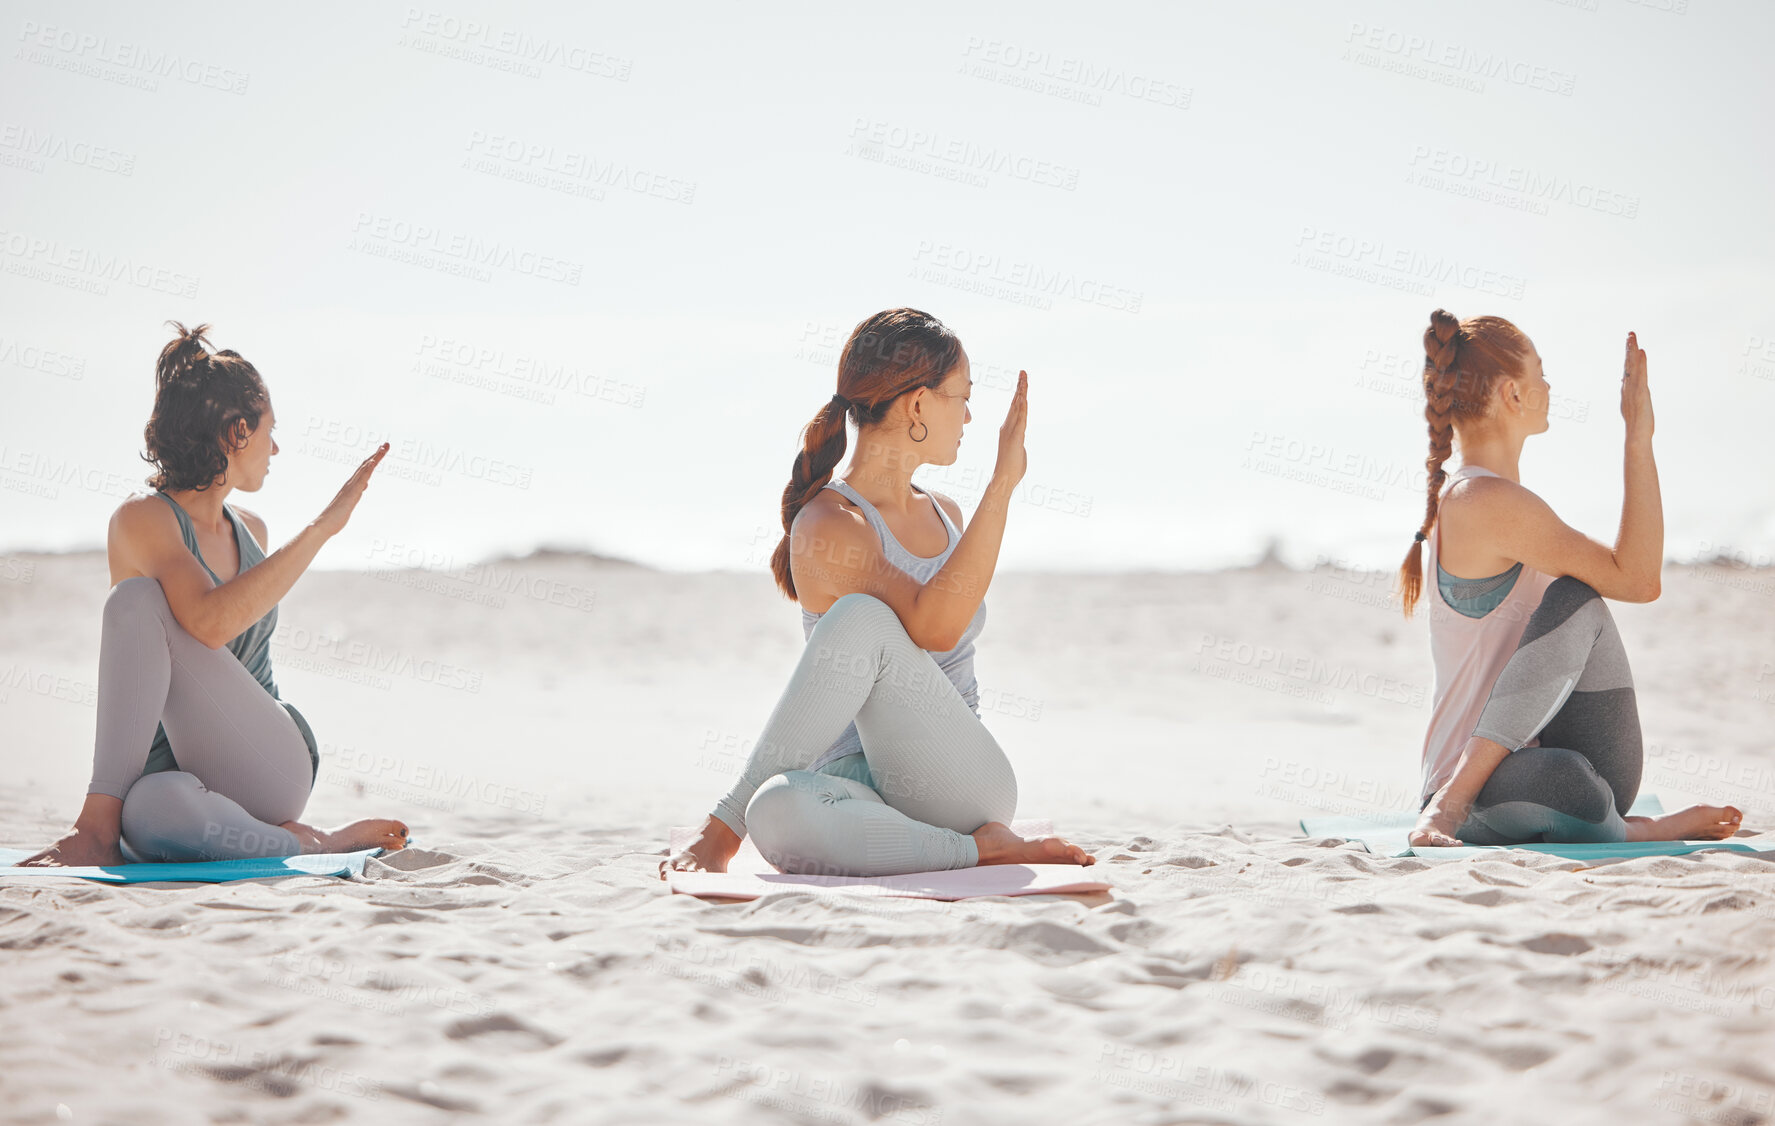 Buy stock photo Zen, heath and yoga group meditation on a beach with women training and meditating together. Athletic friends exercise, practice posture and balance yoga pose with zen, peaceful energy in nature